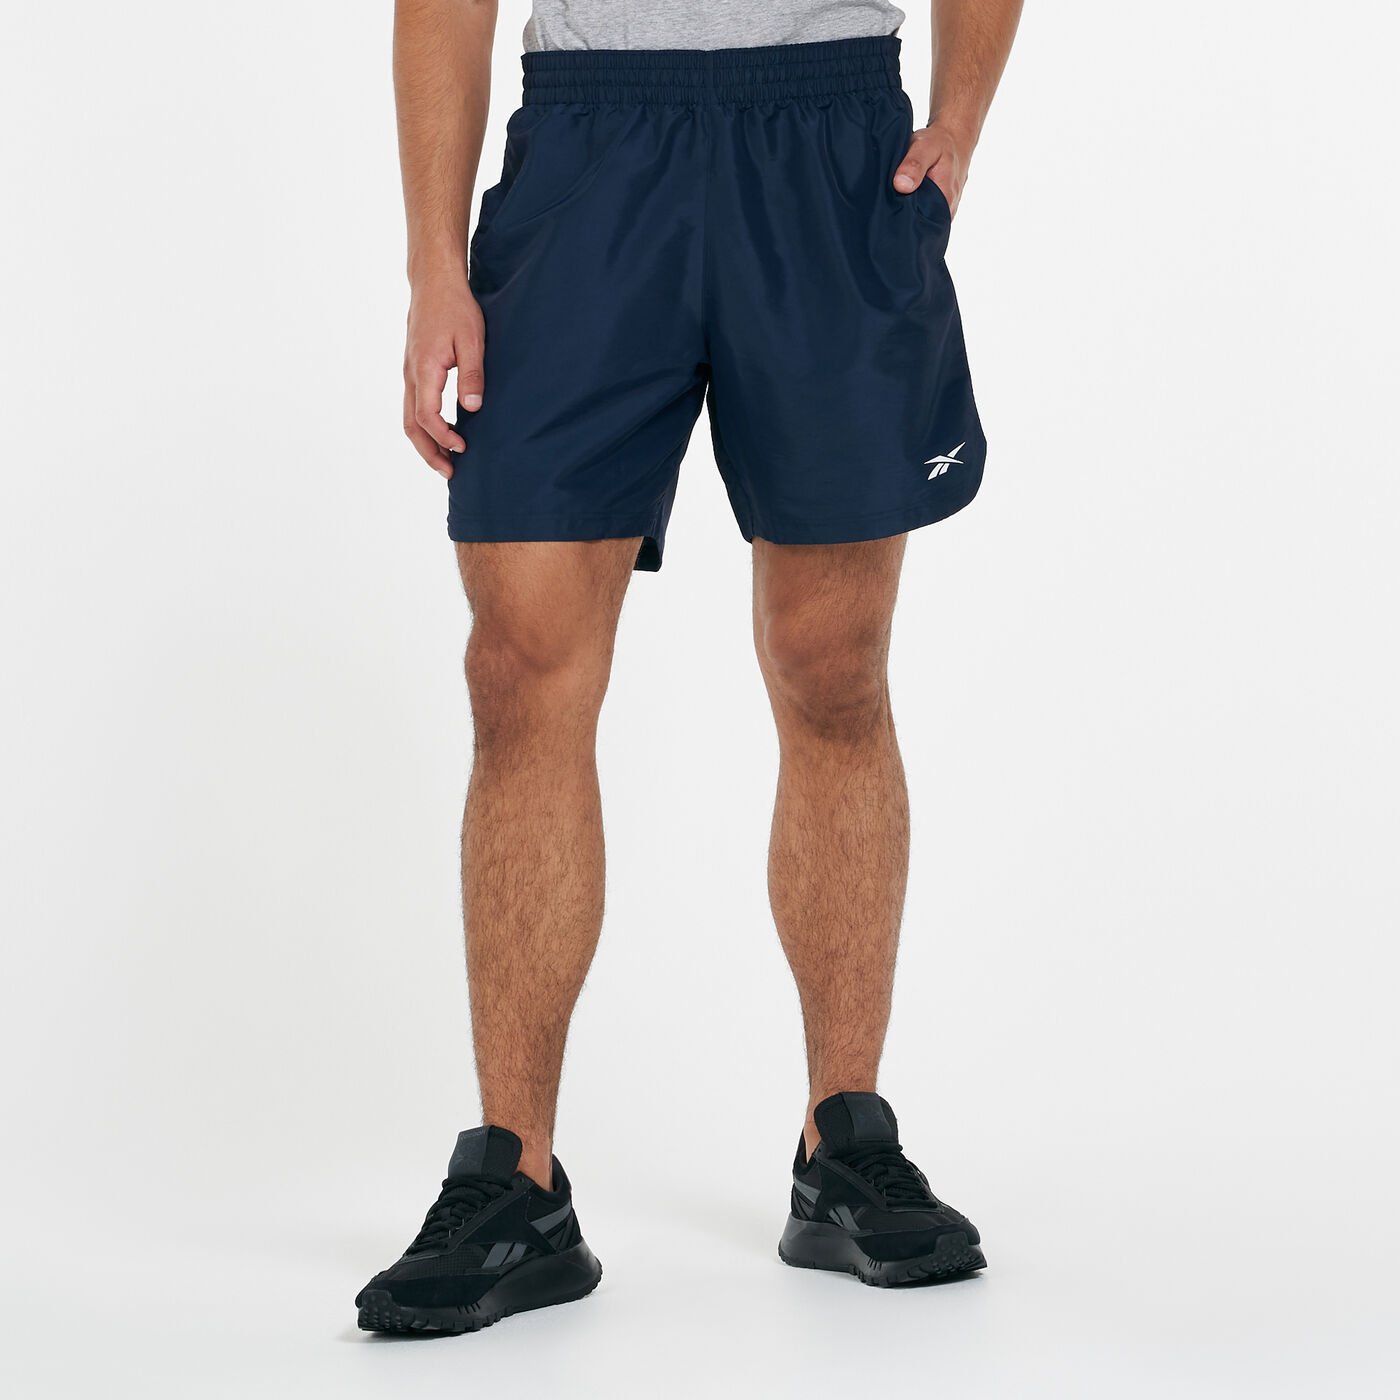 Men's Meet You There Woven Shorts